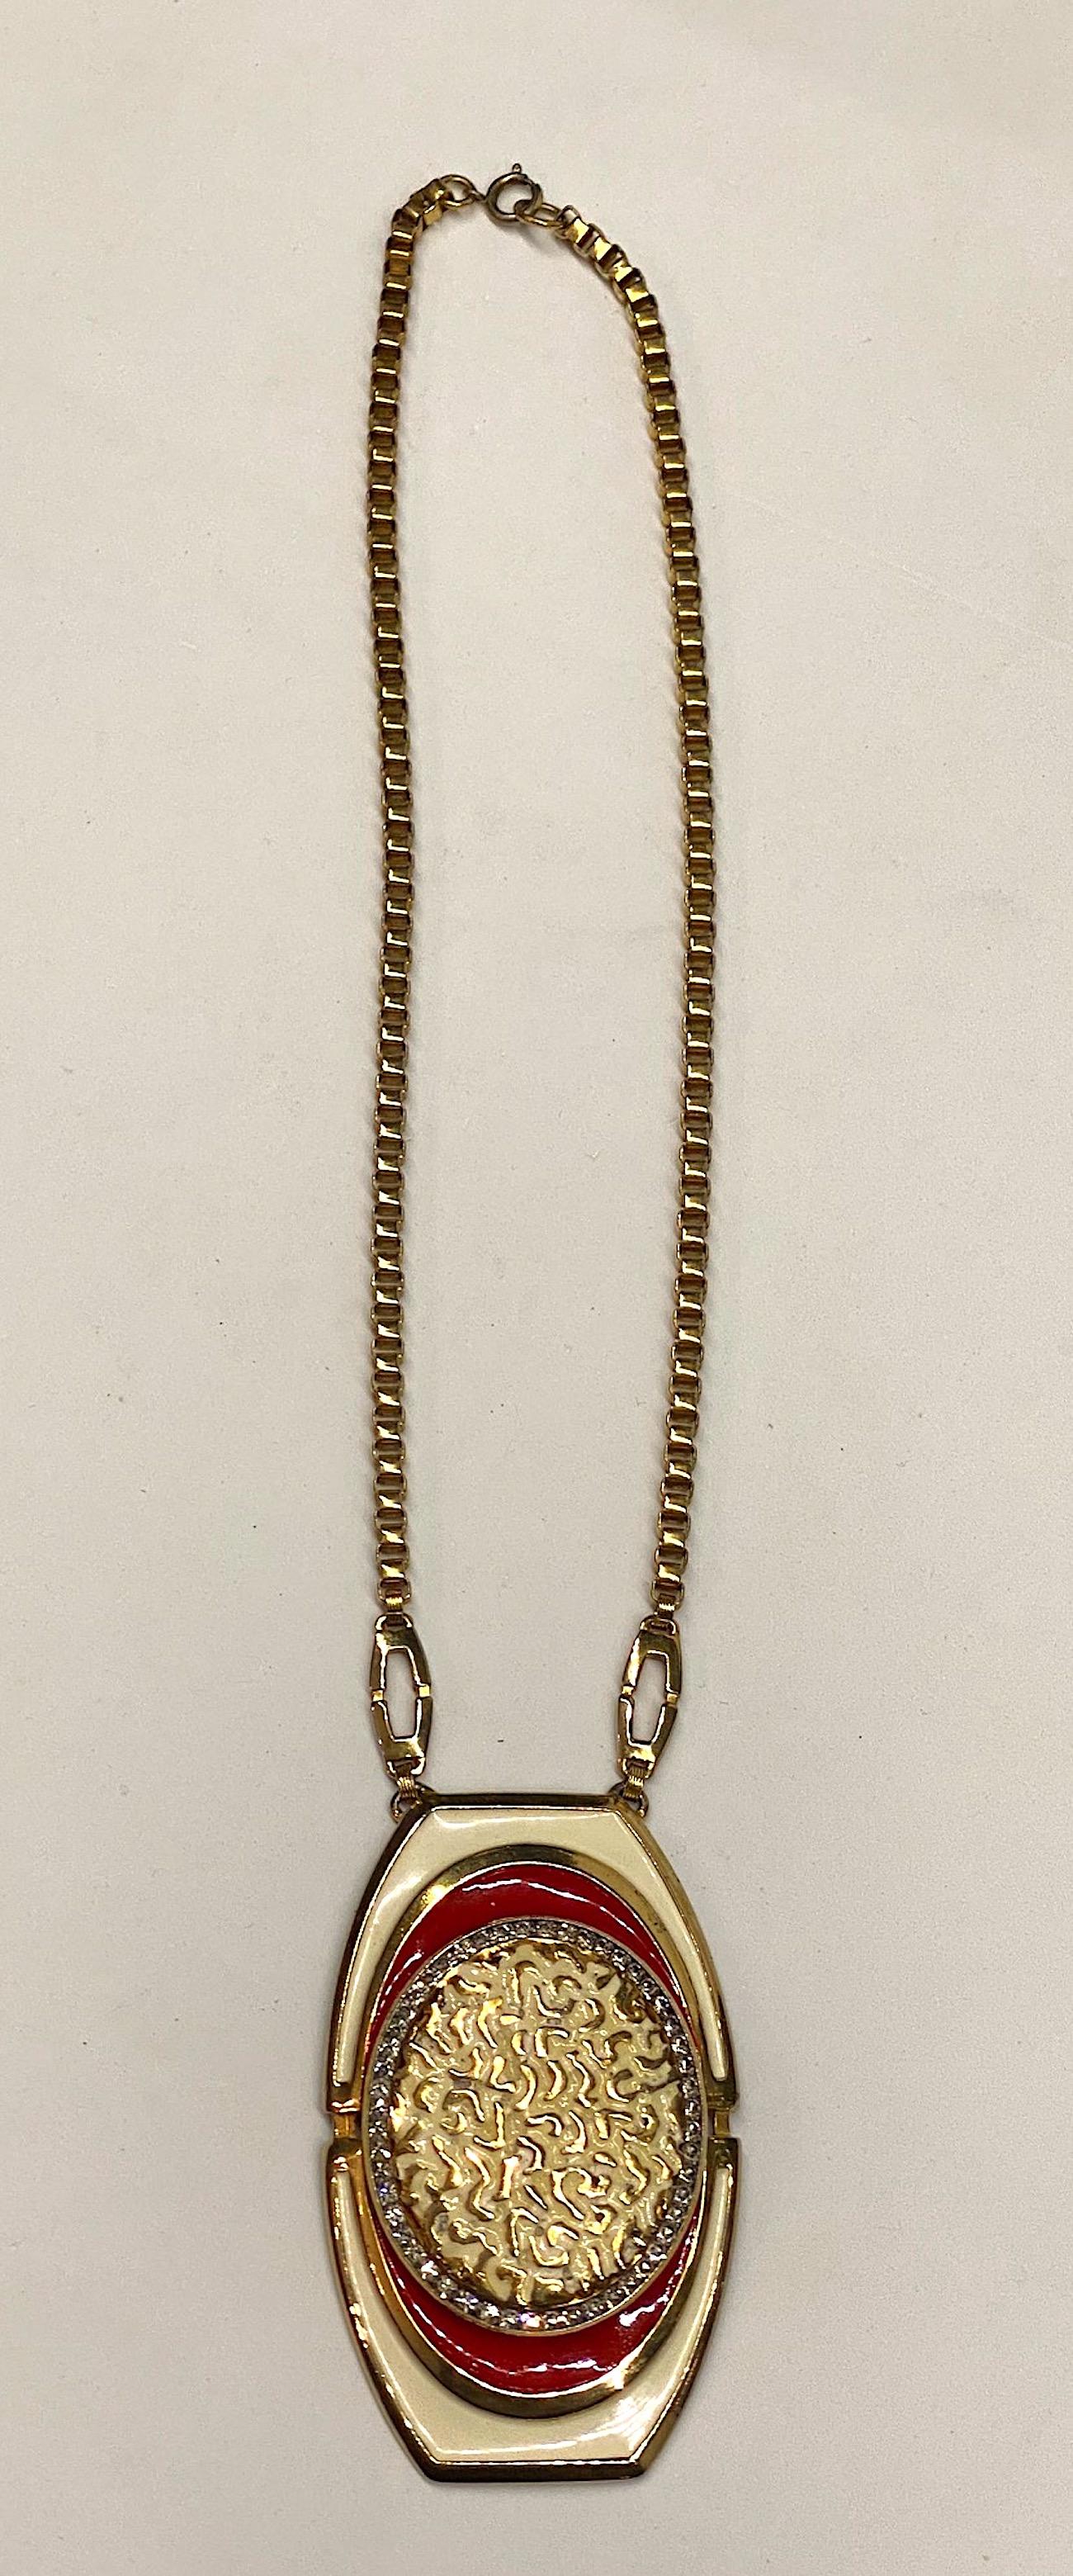 Lucien Piccard 1970s enamel and gold tone pendant necklace. A large cast pendant 2.13 inches wide and 3.5 inches long is suspended from two .88 long oval links and a thick box link chain. The pendant is enameled in an off white and red enamel. The